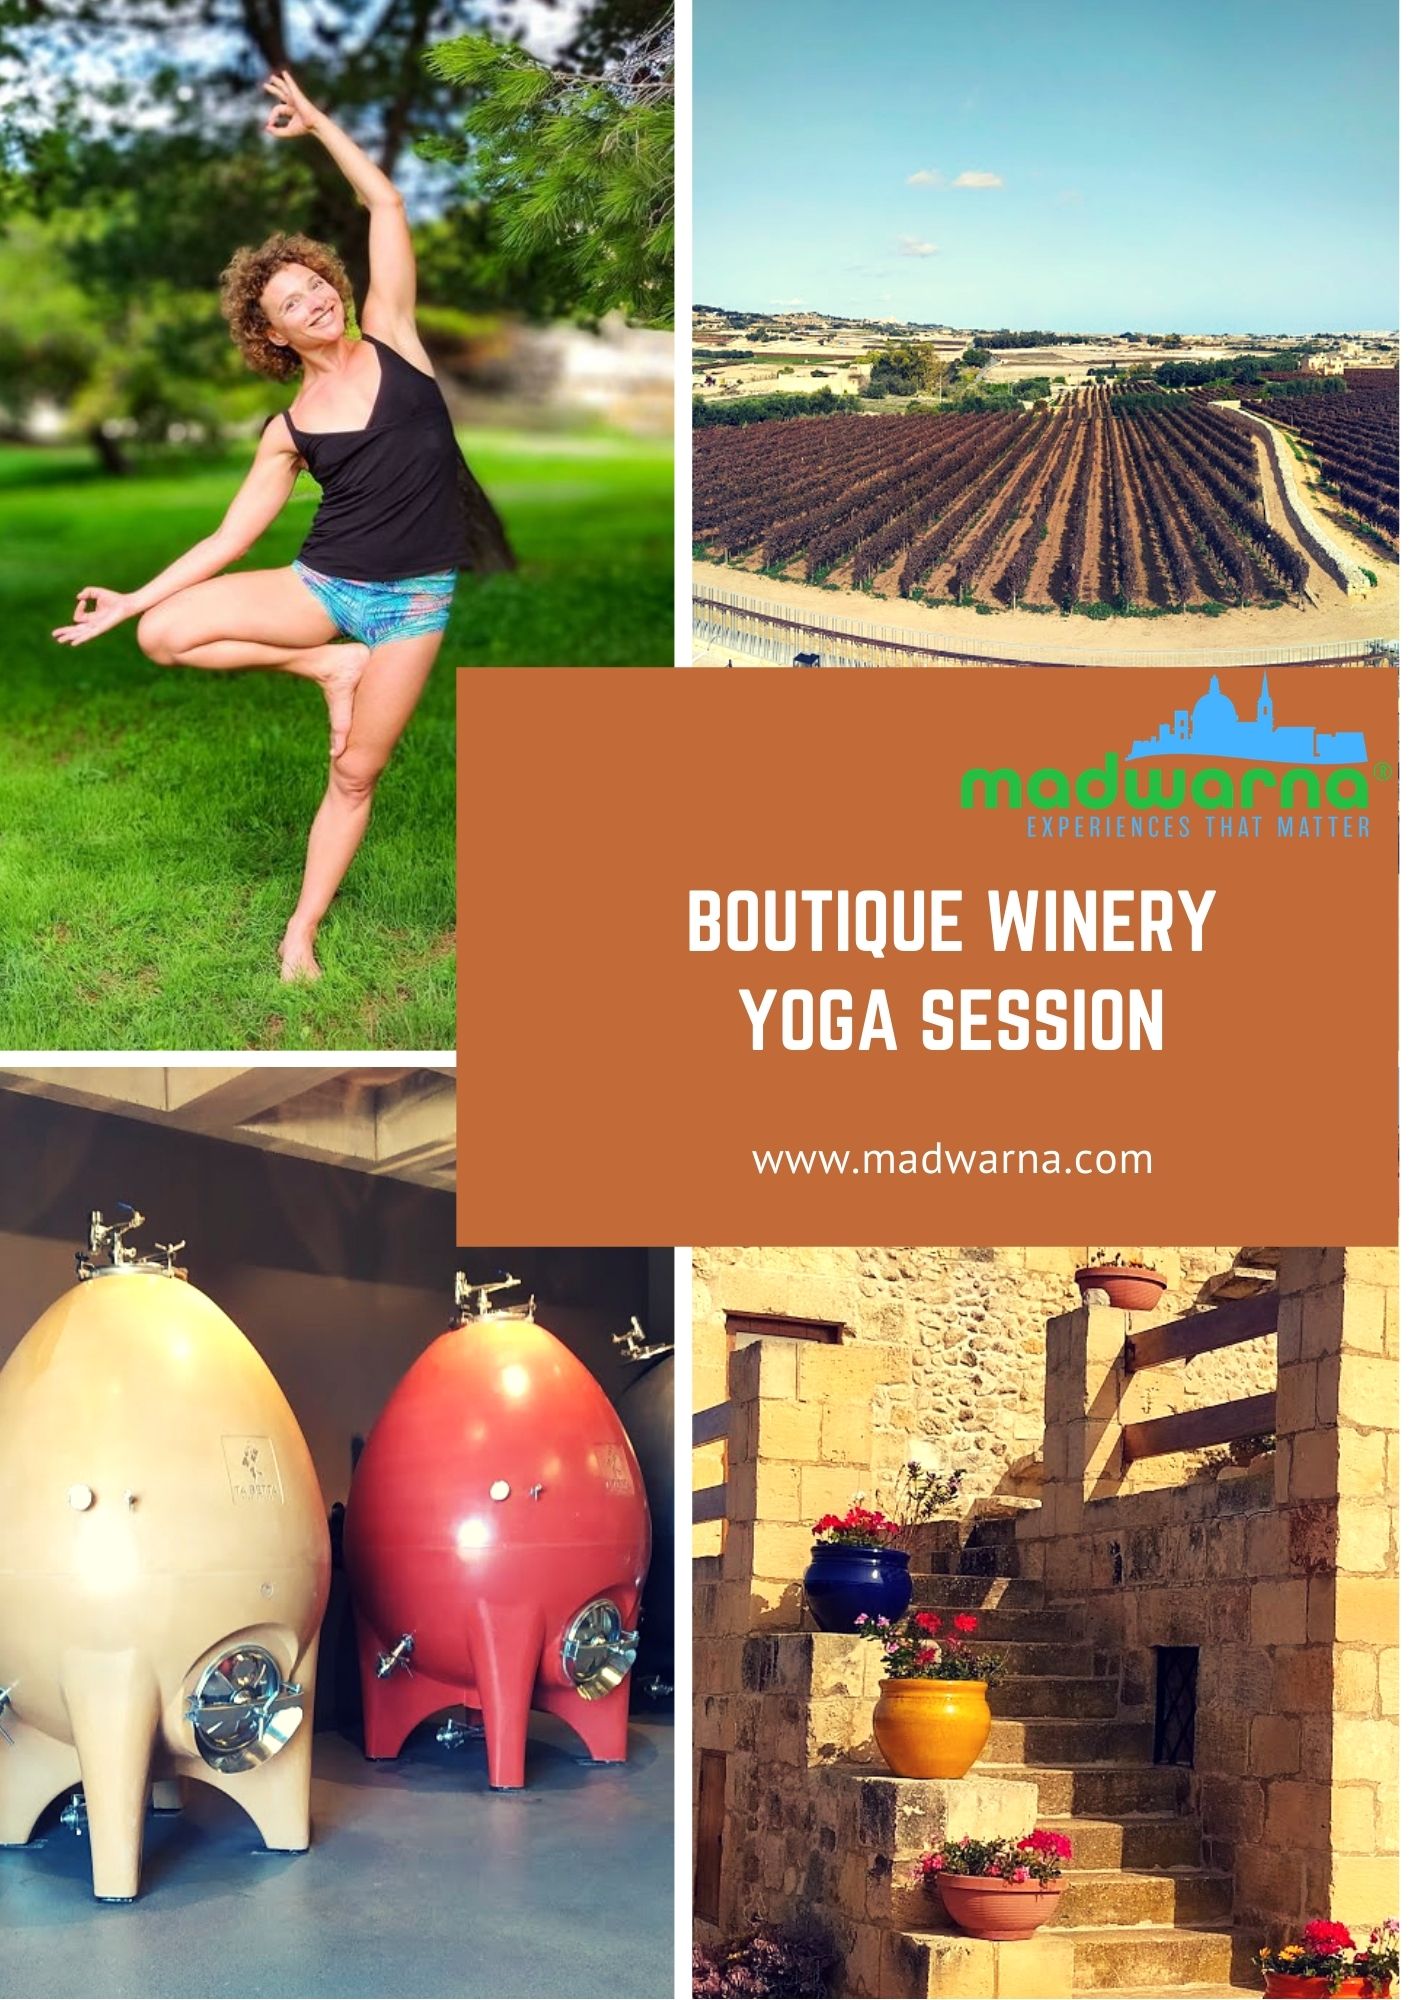 Boutique Winery & Yoga Session poster